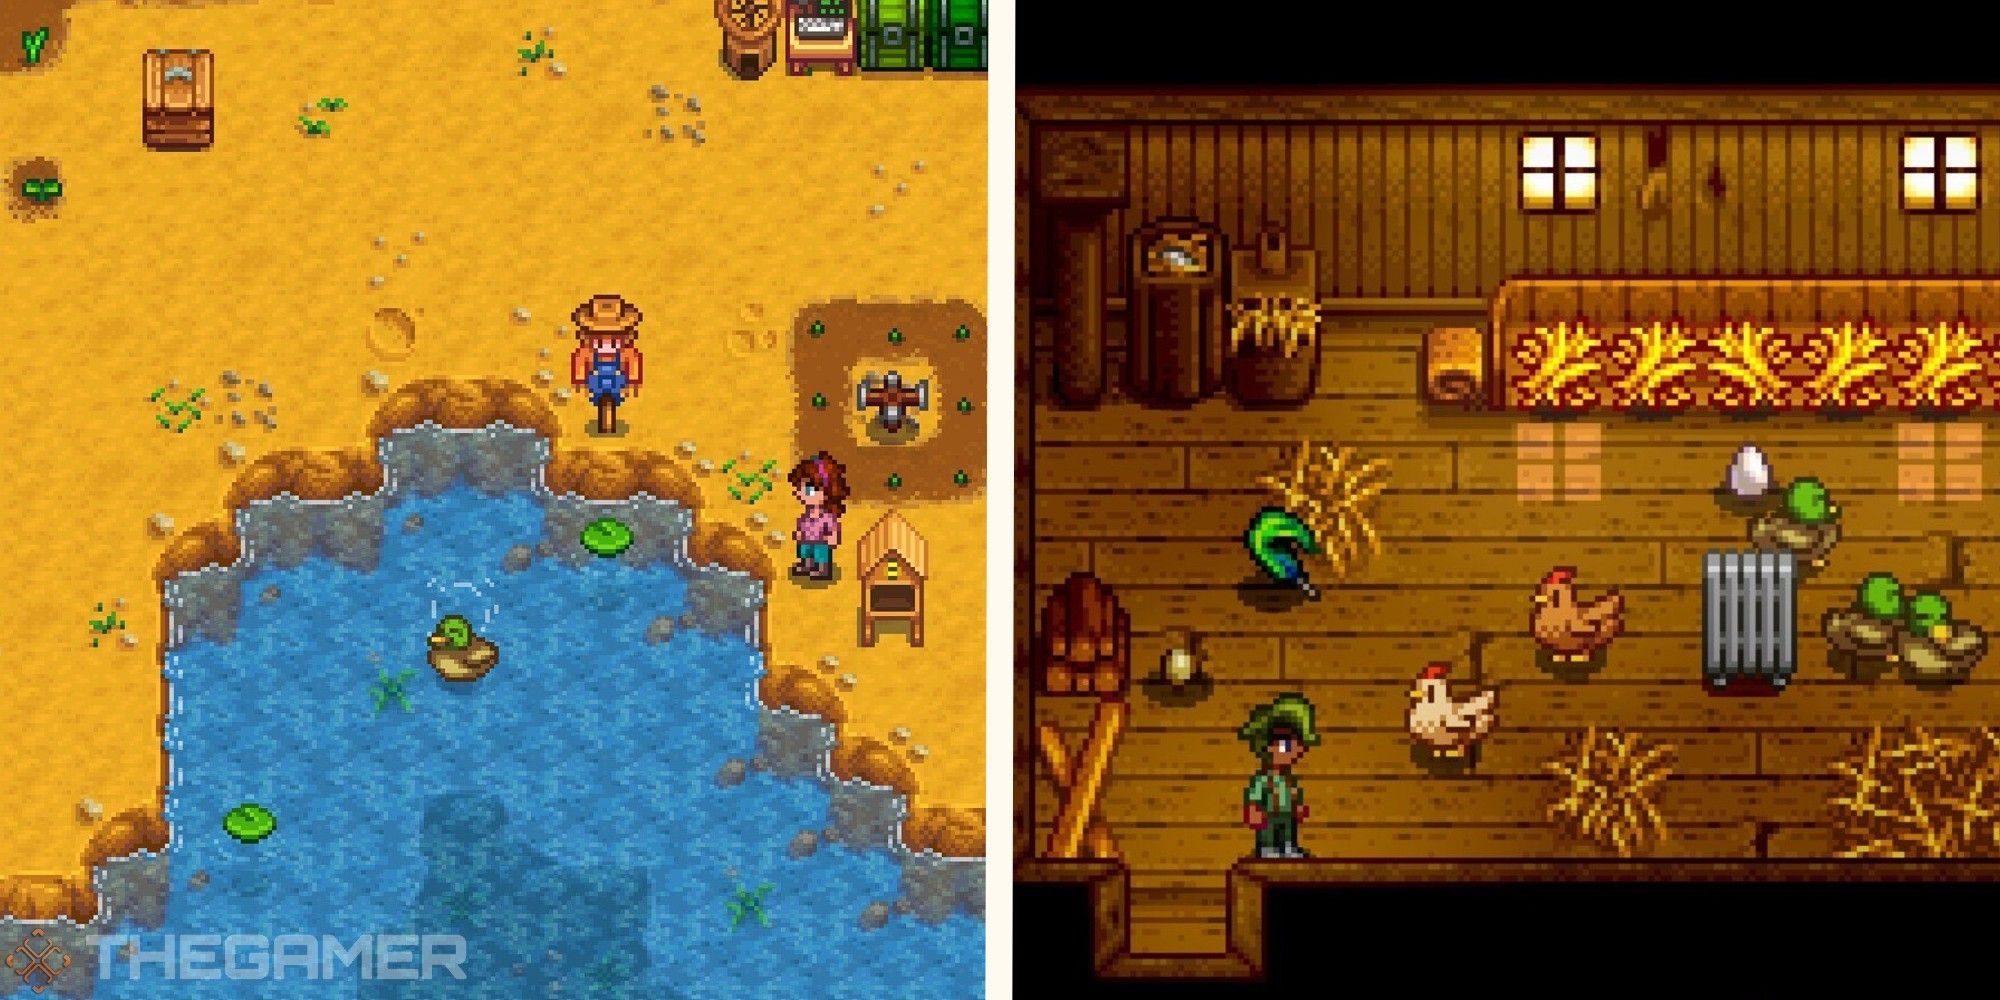 image of duck in pond next to image of duck feather in coop with chickens